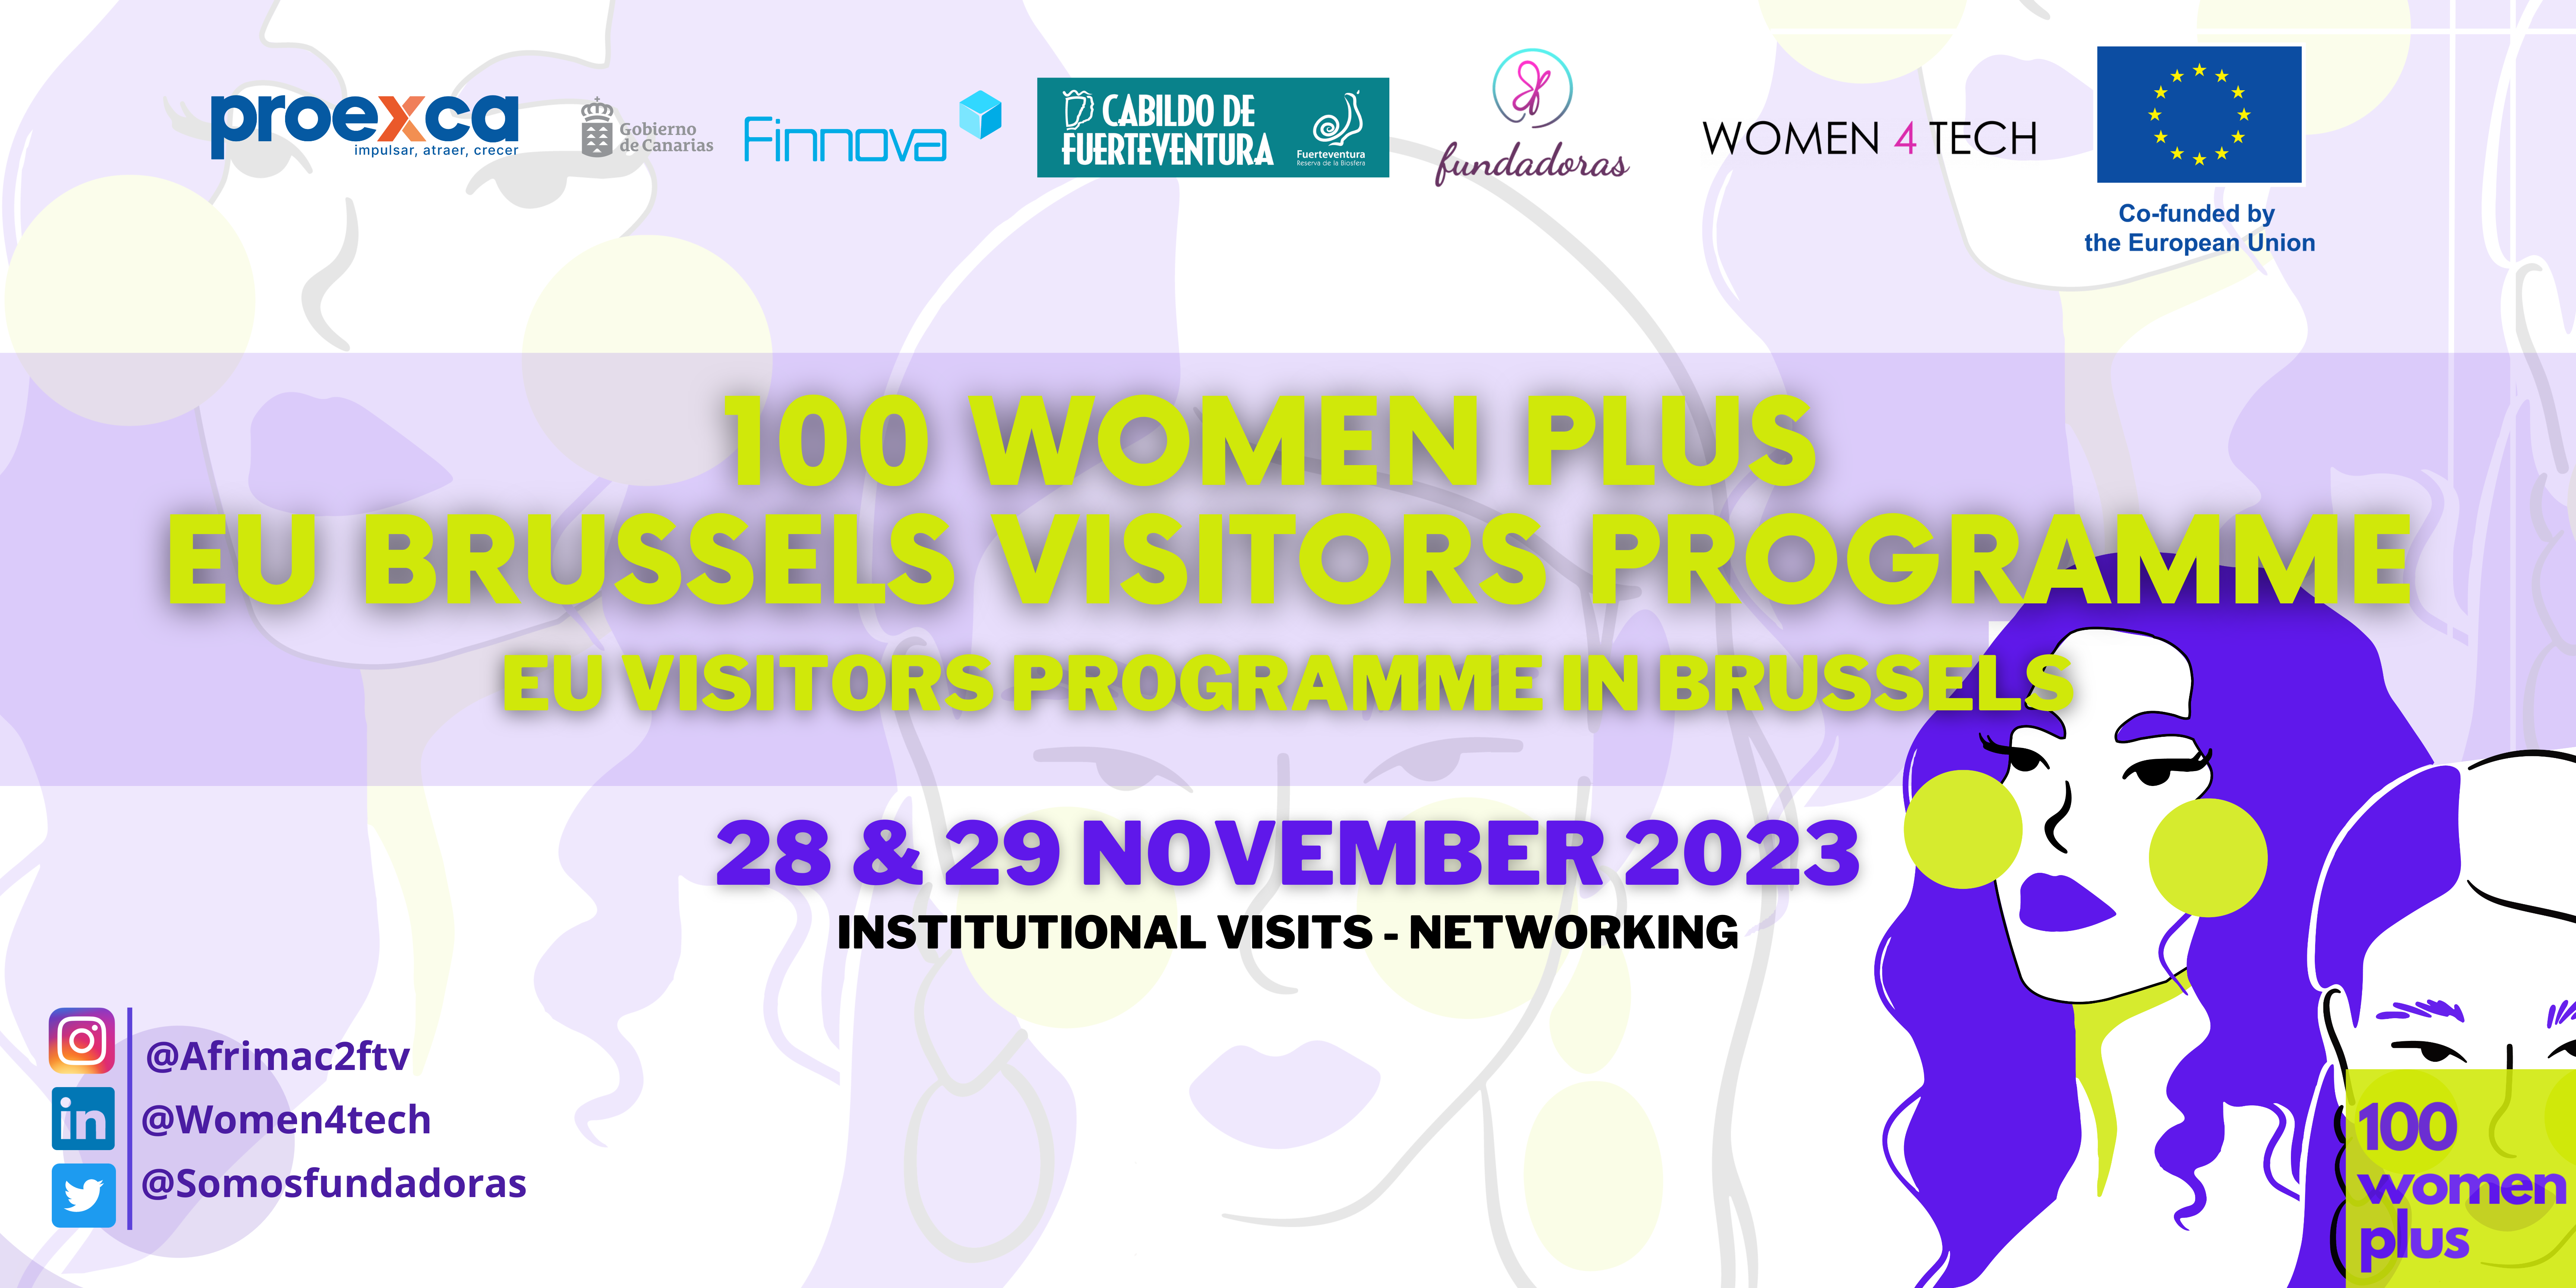 Next Tuesday 28th and Wednesday 29th of November Finnova Foundation and the Cabildo of Fuerteventura present the European project 100 Women Plus in Brussels to businesswomen from Fuerteventura